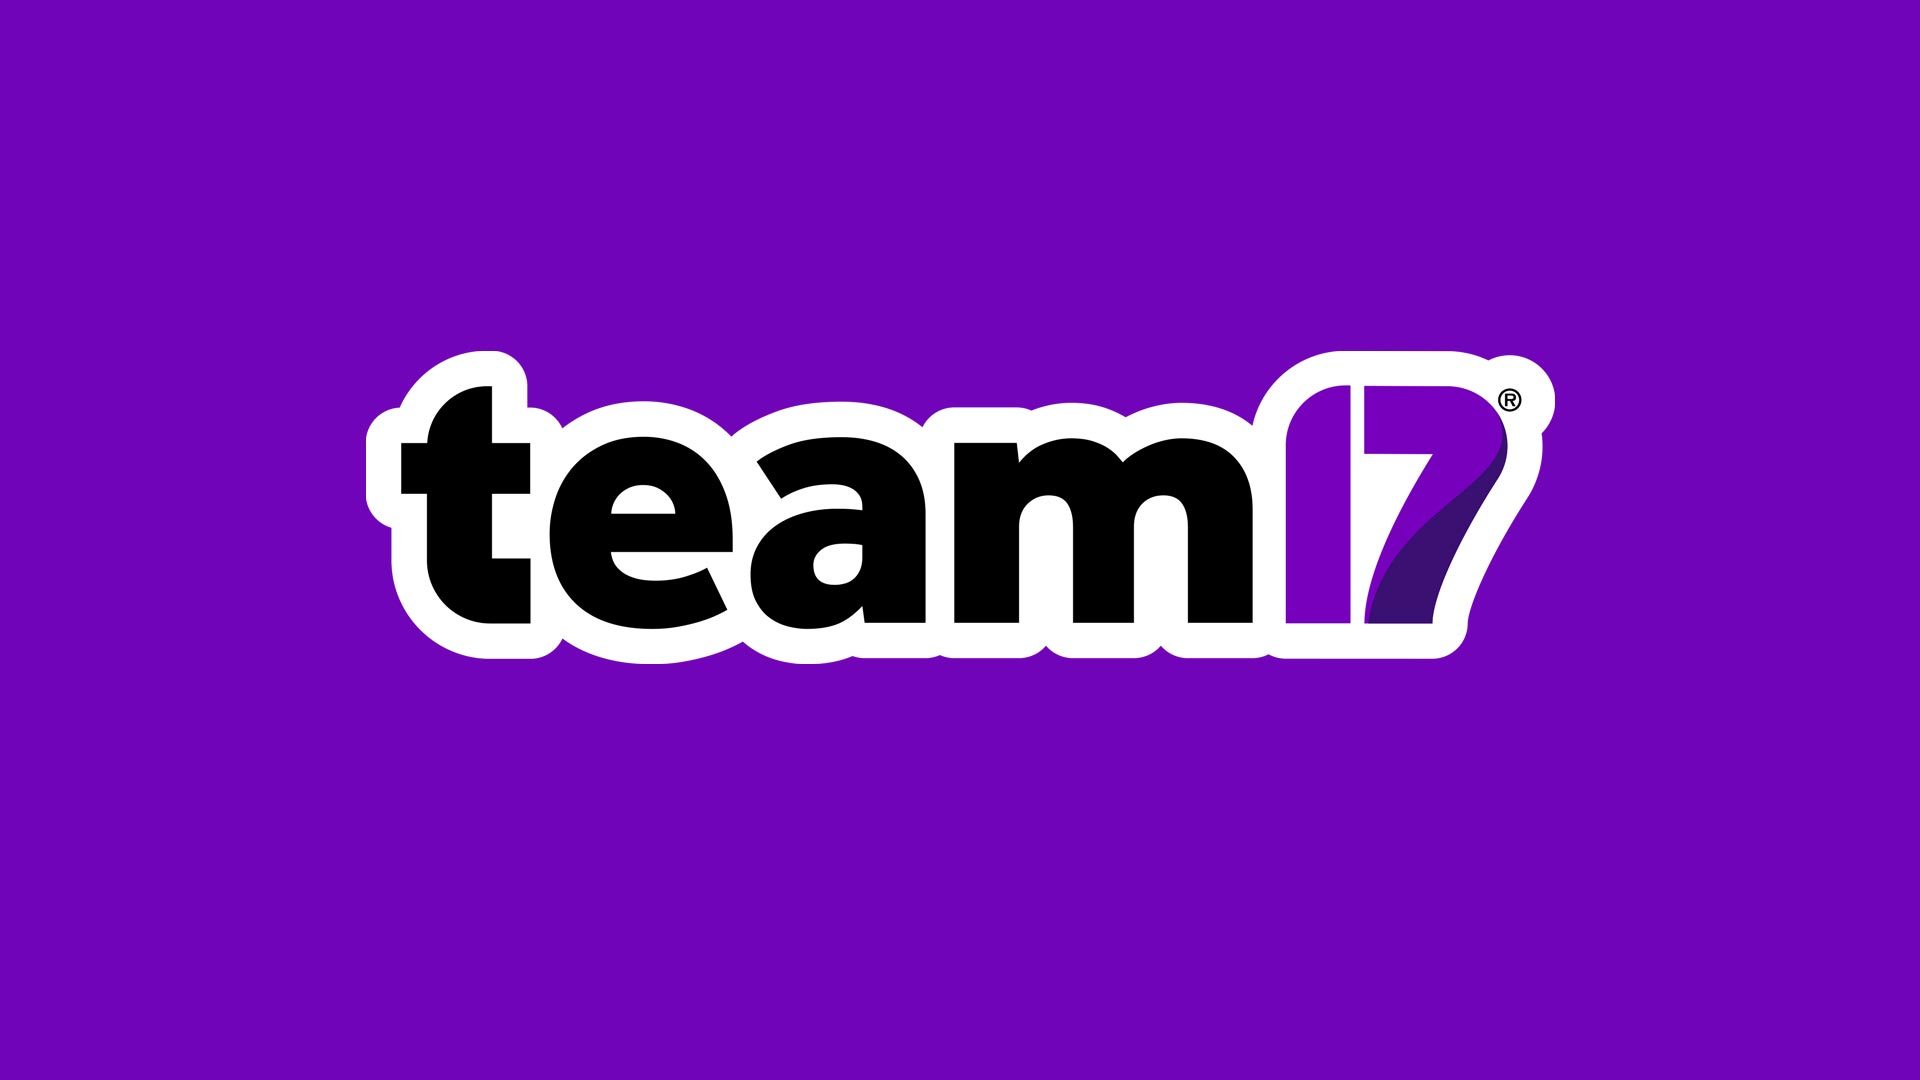 Team17 CEO And To Leave Company Amid Layoffs